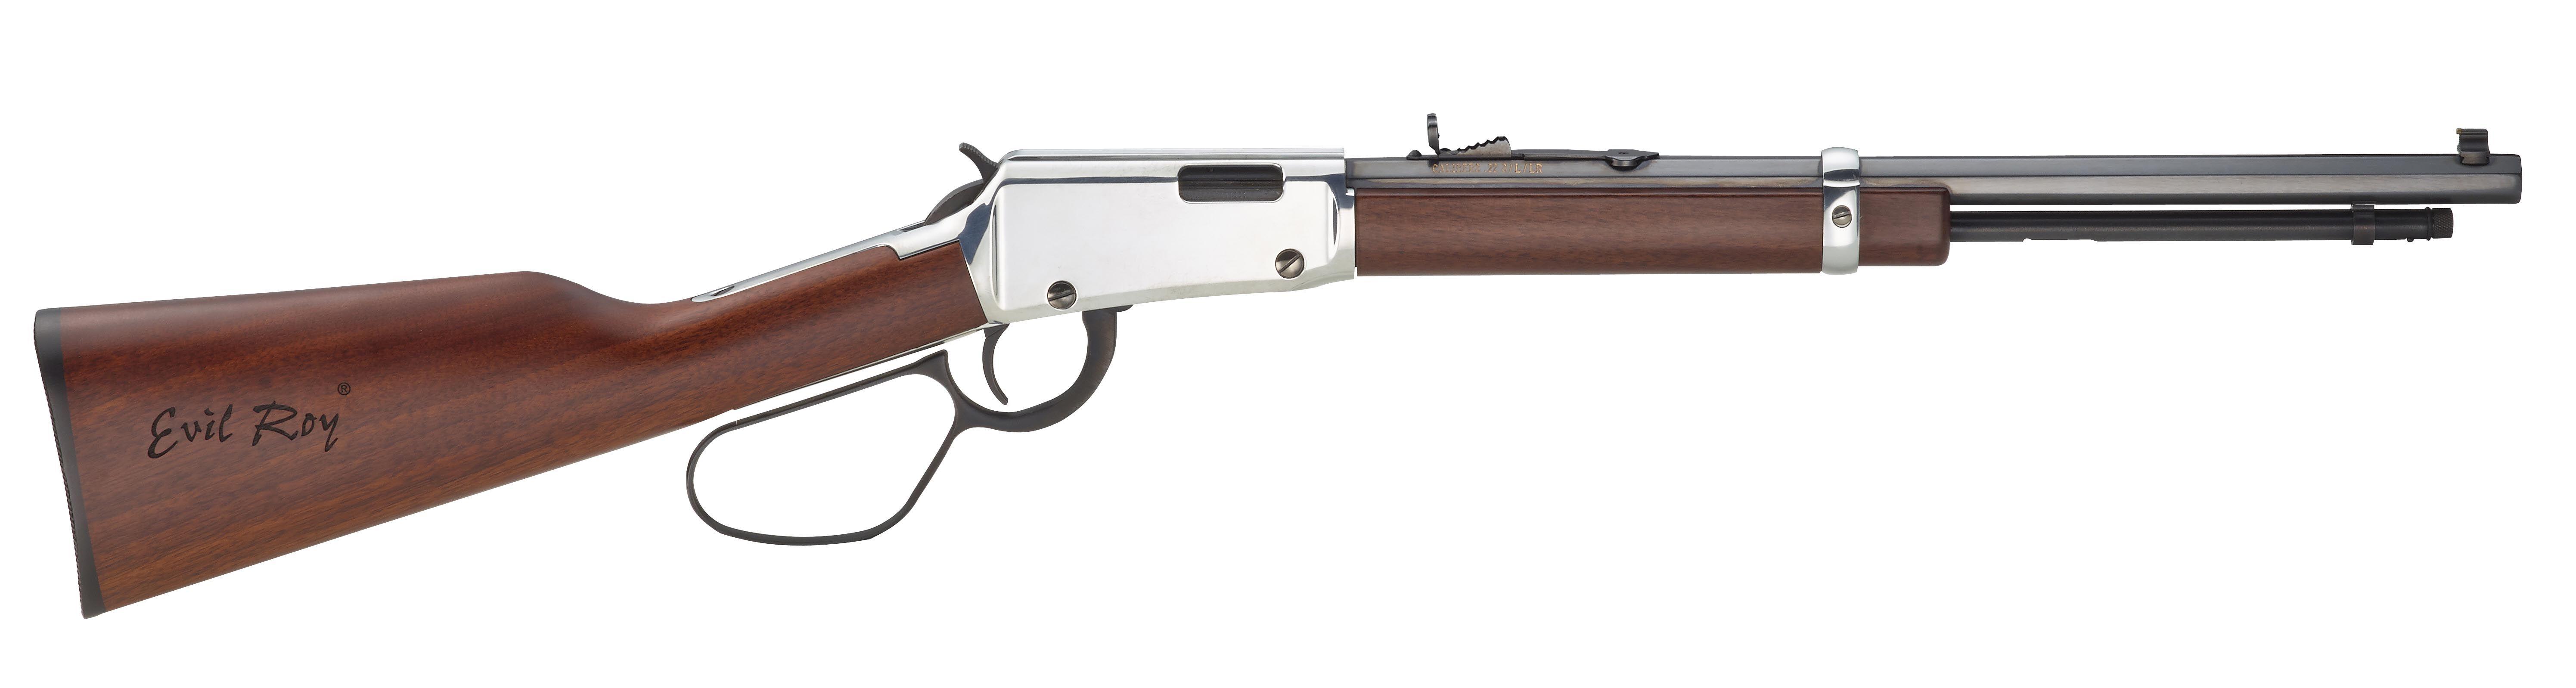 Henry Repeating Arms Logo - Personally Signed Henry Repeating Arms Frontier Carbine “Evil Roy ...